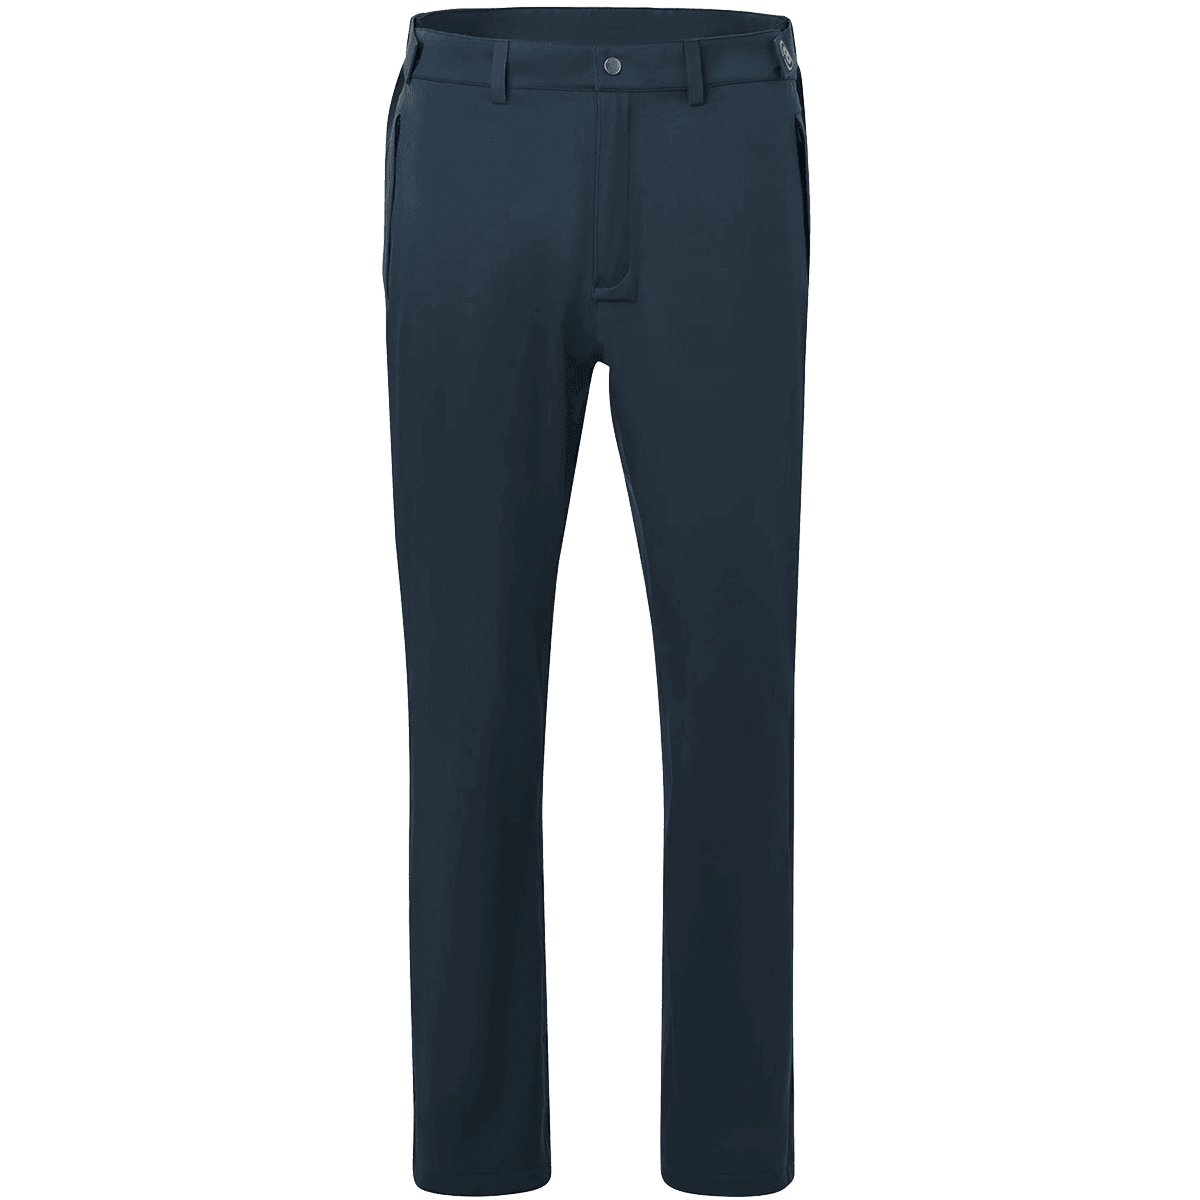 Abacus Bounce Rain Trouser review - National Club Golfer